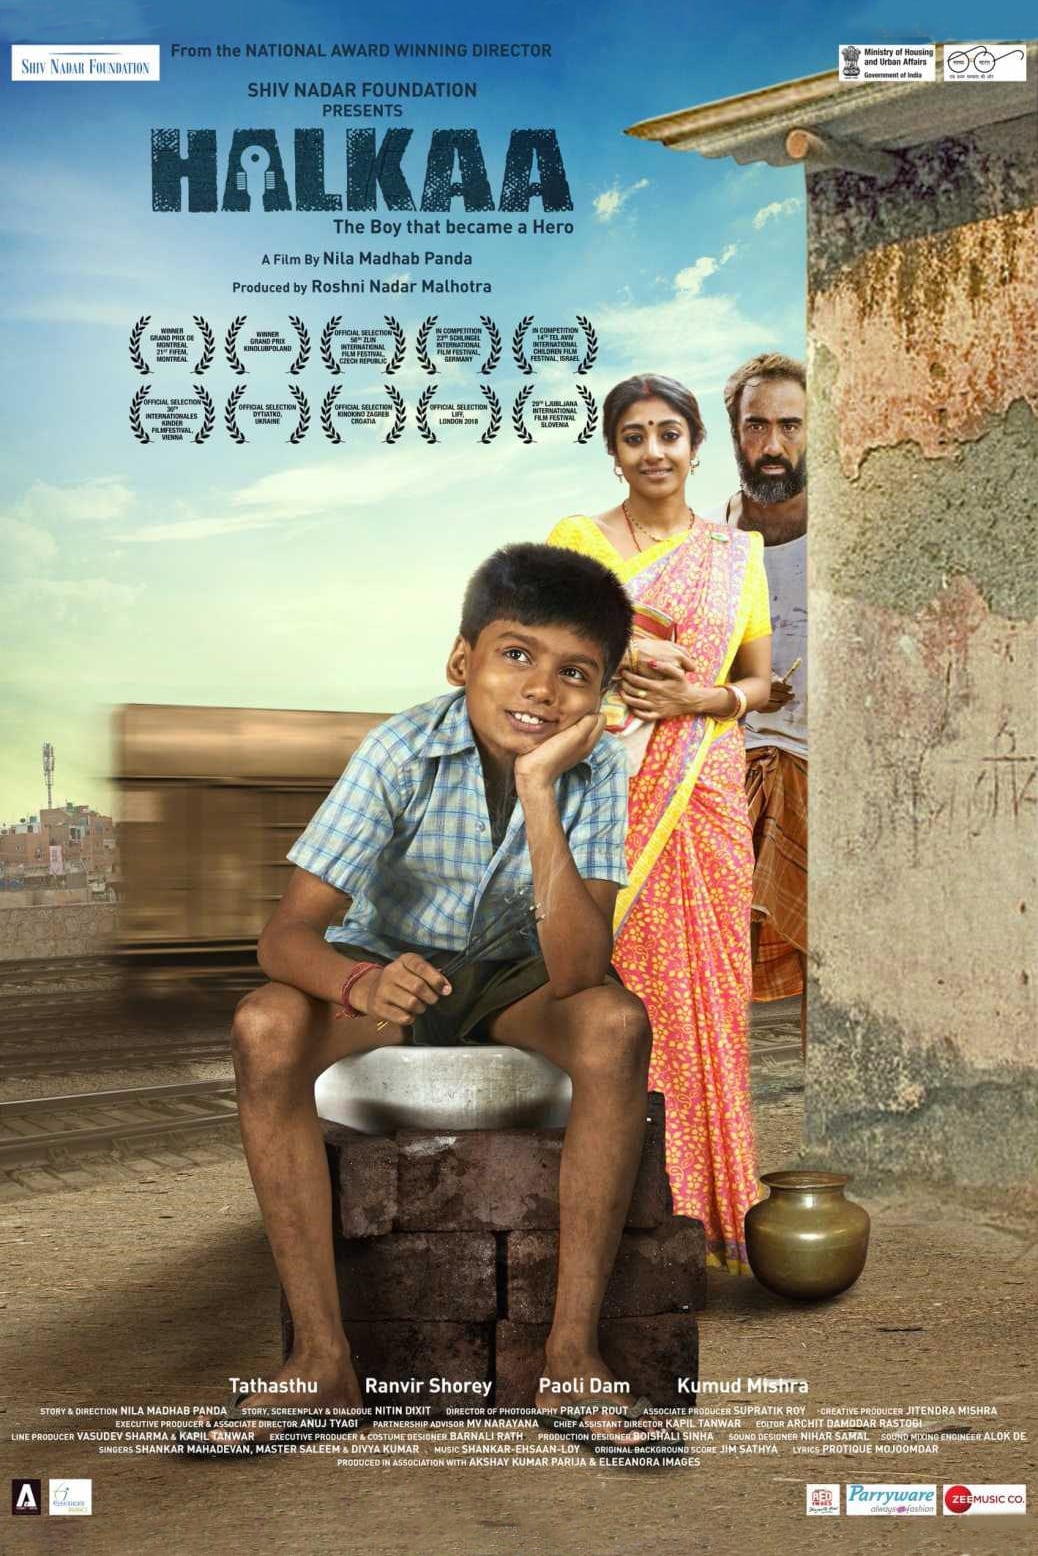 Poster for the movie "Halkaa"